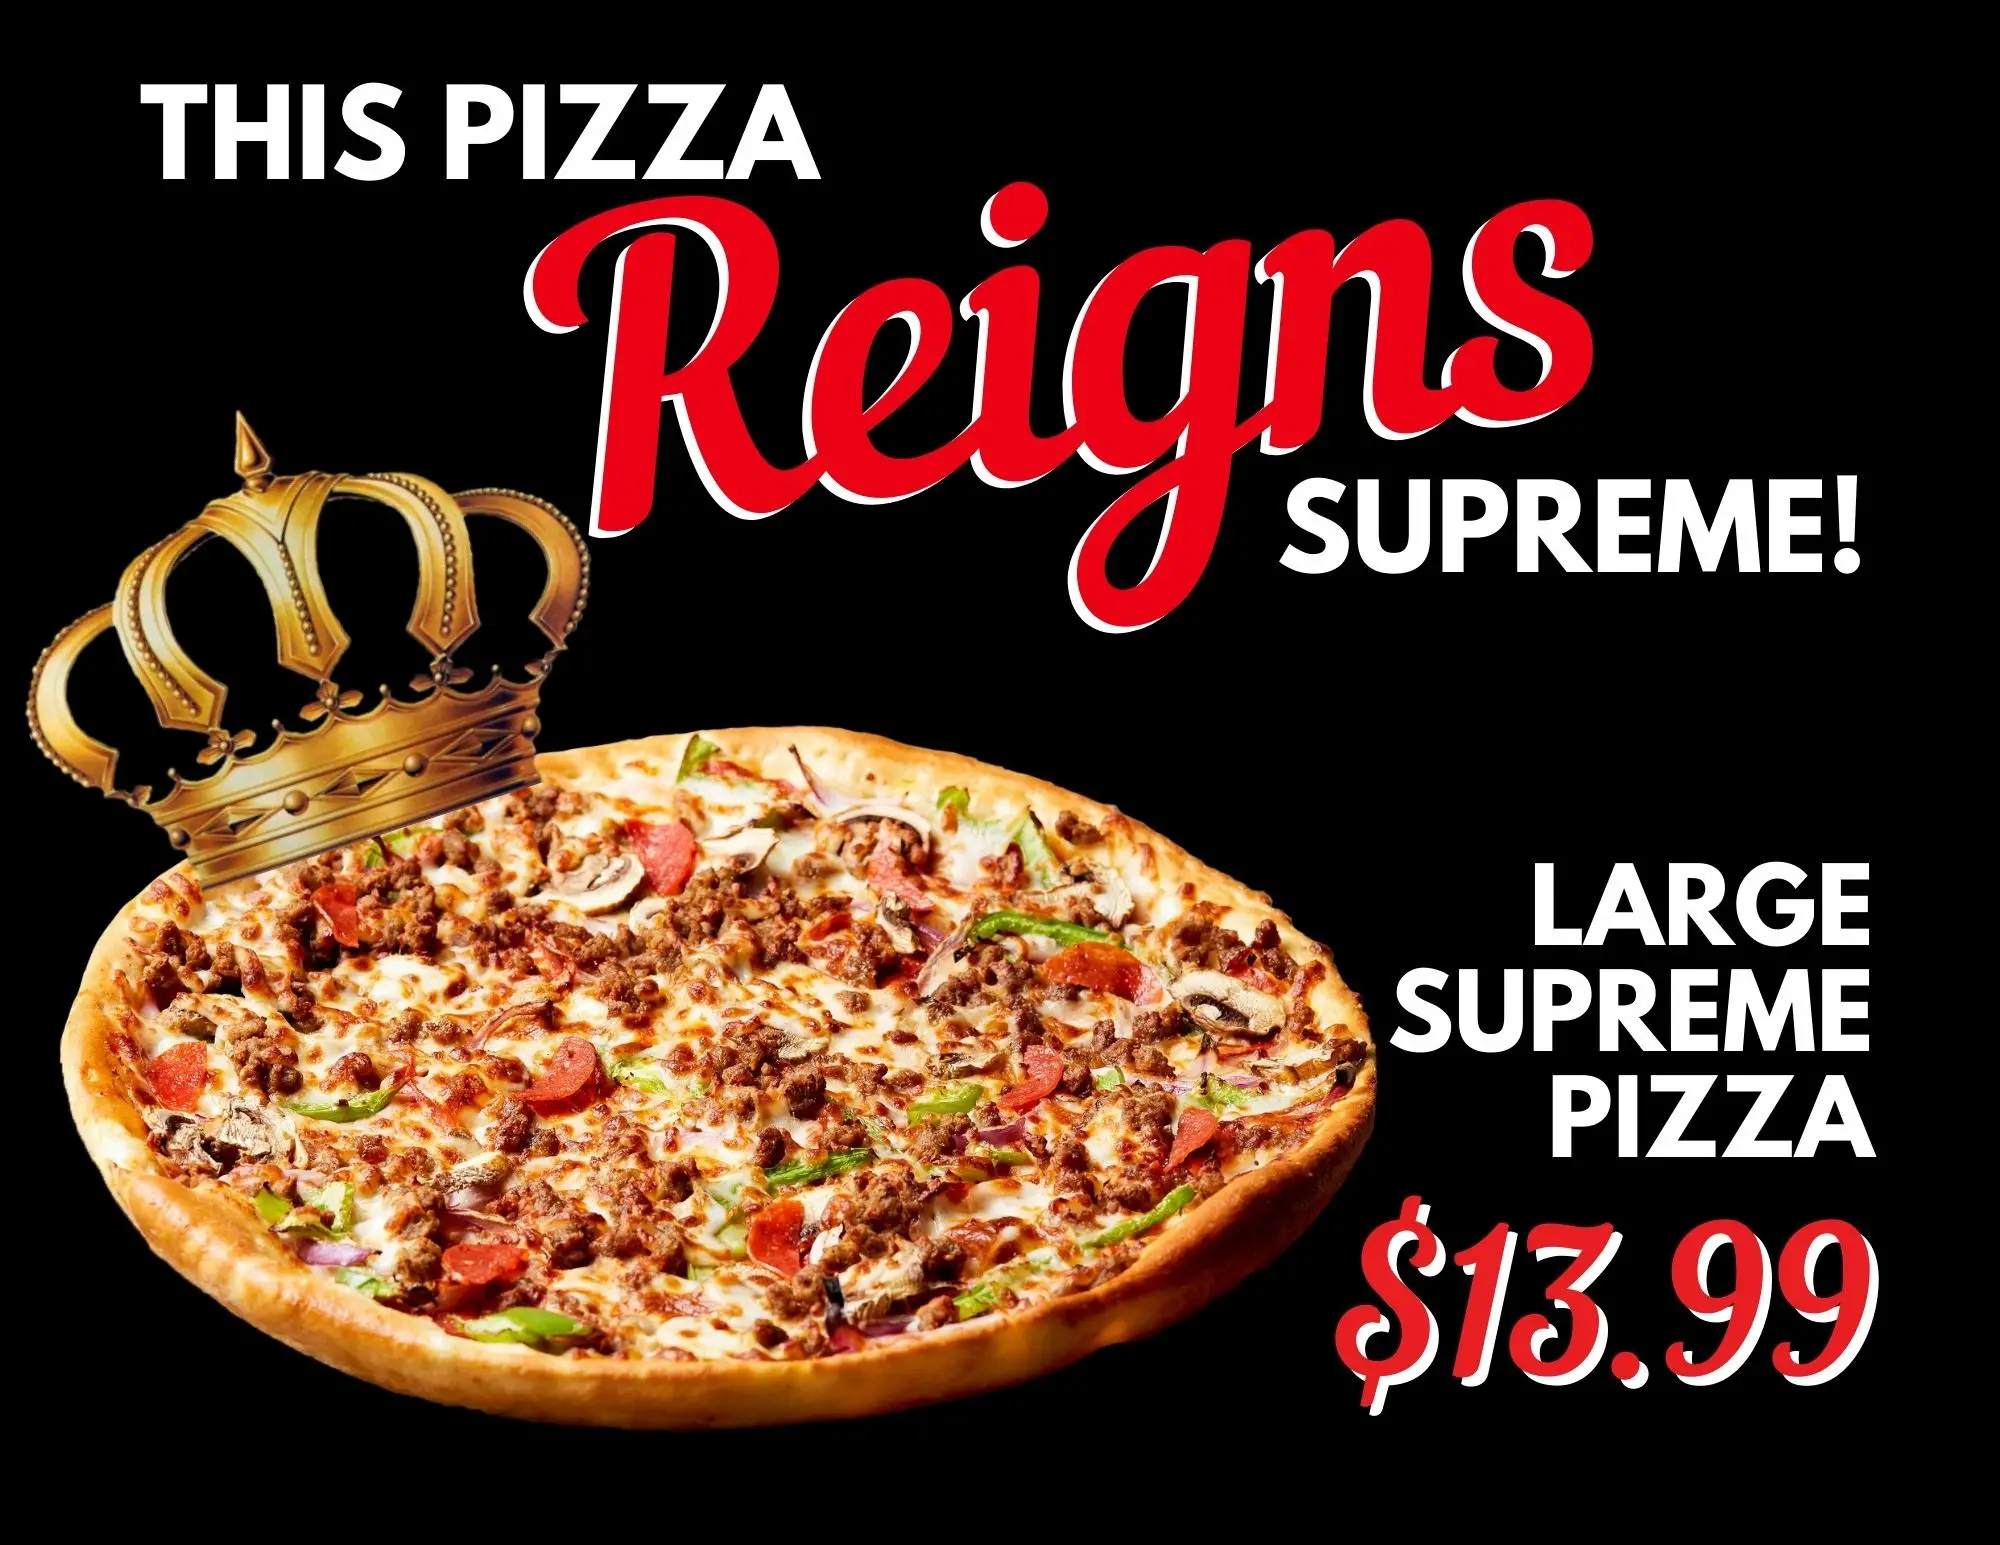 Simple Simon's Pizza National Pizza Week Enjoy a Large Supreme Pizza for only $13.99